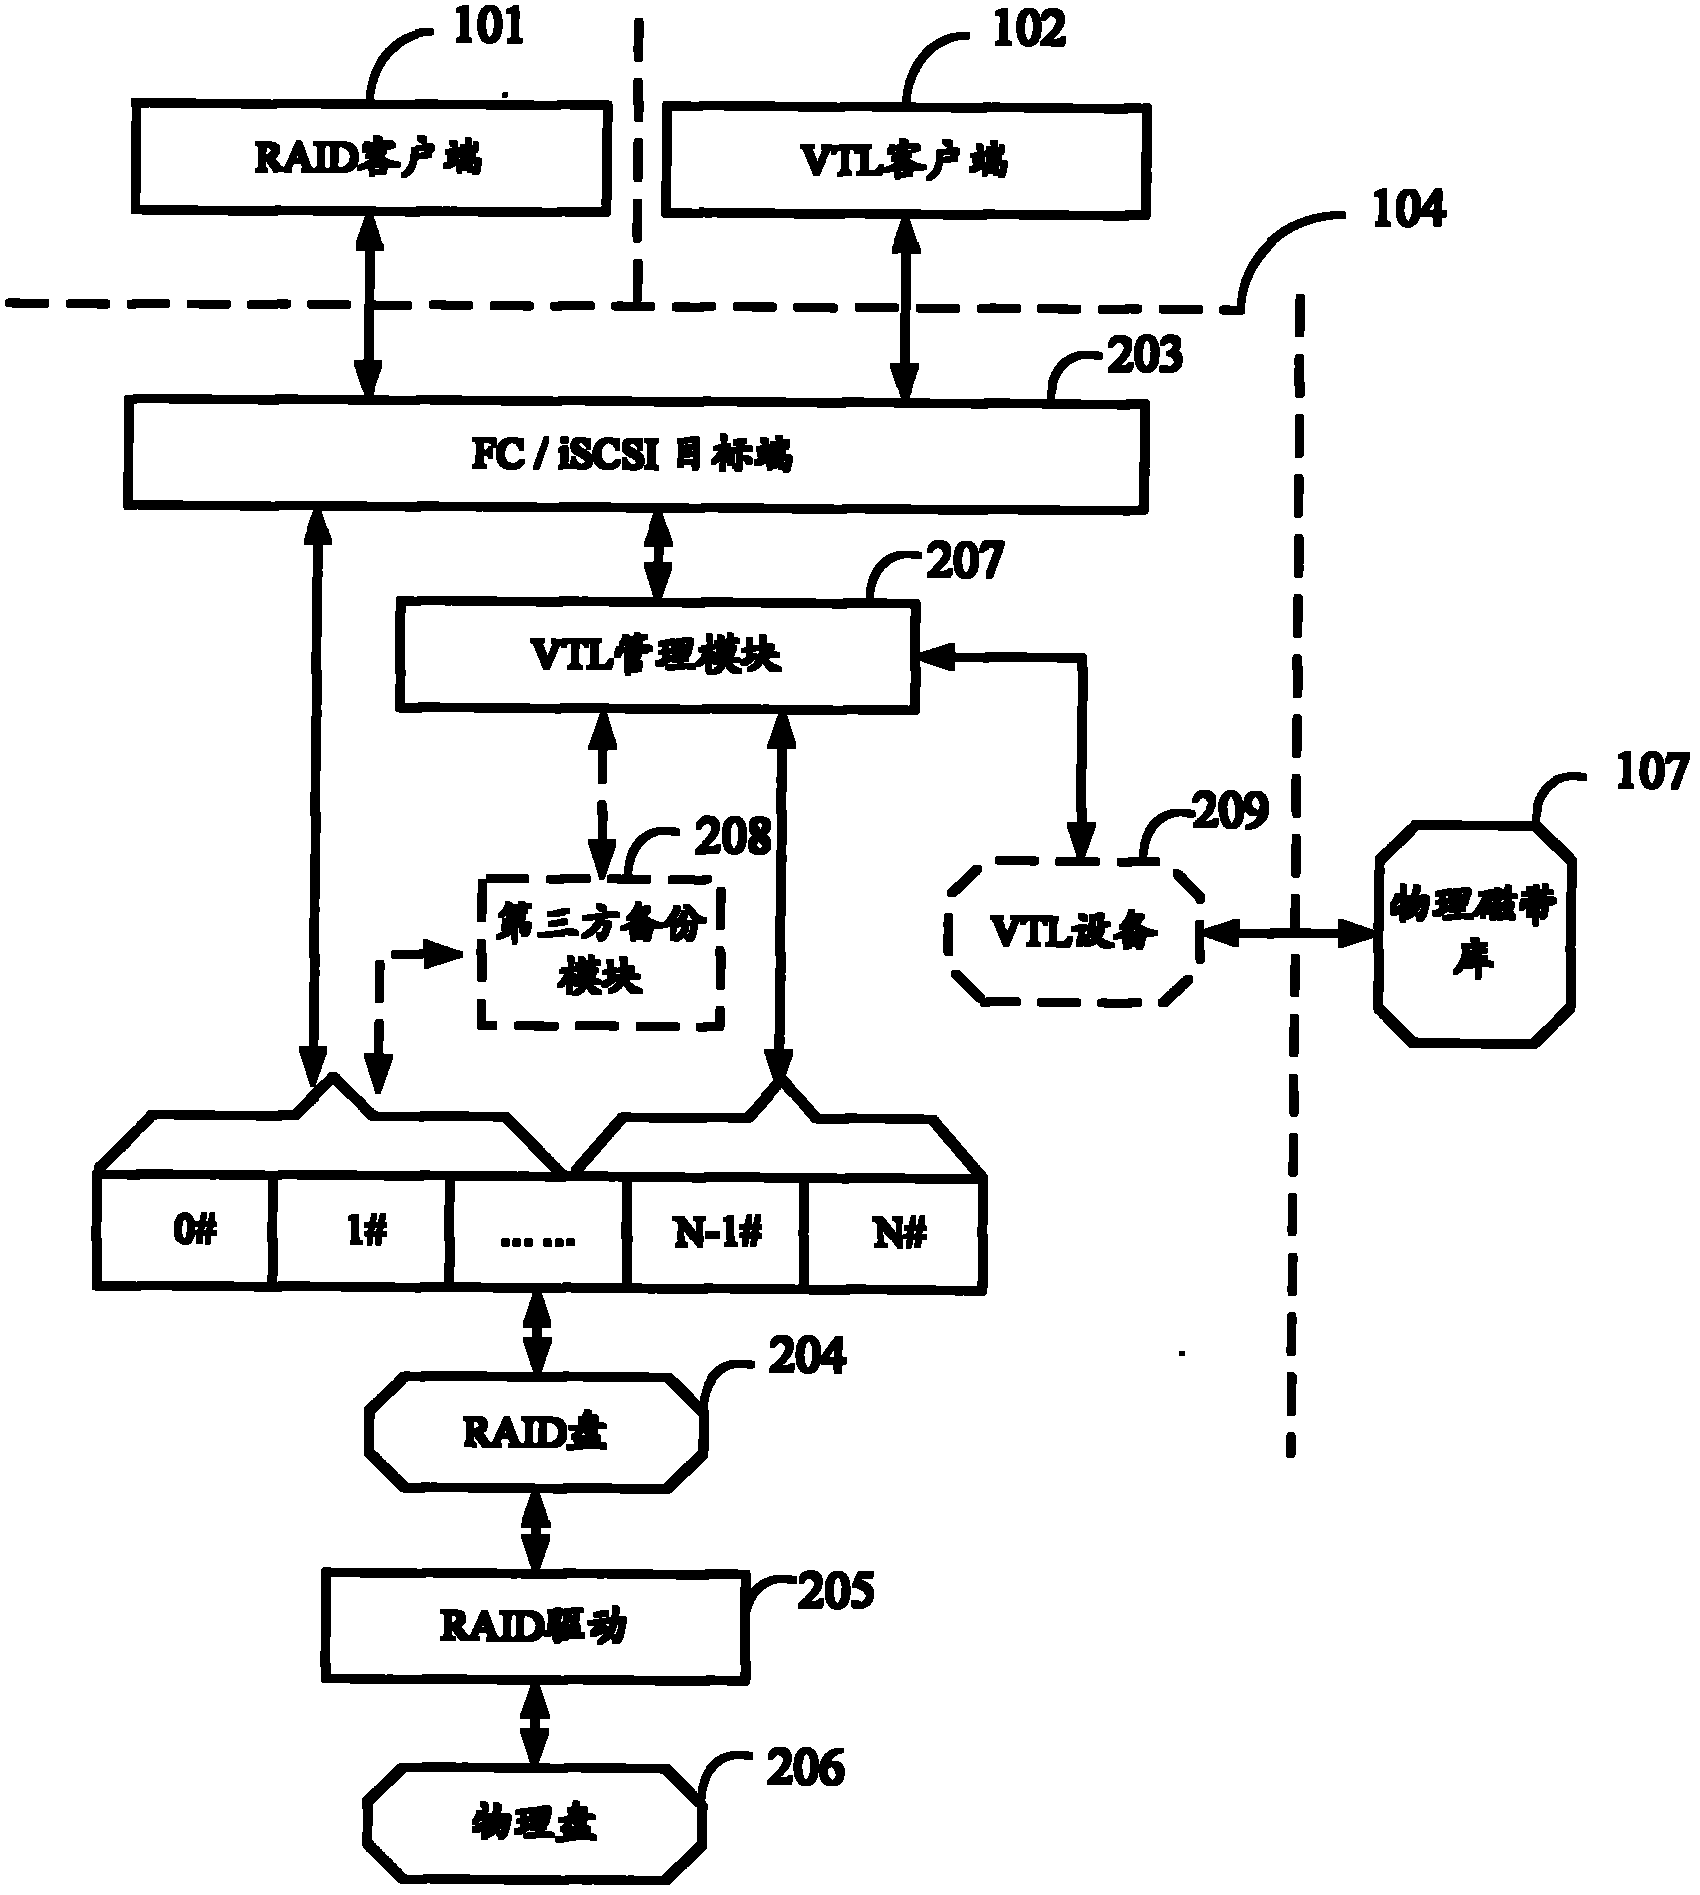 Storage equipment with both RAID (Redundant Array Of Inexpensive Disk) and VTL (Virtual Tape Library) functions and method